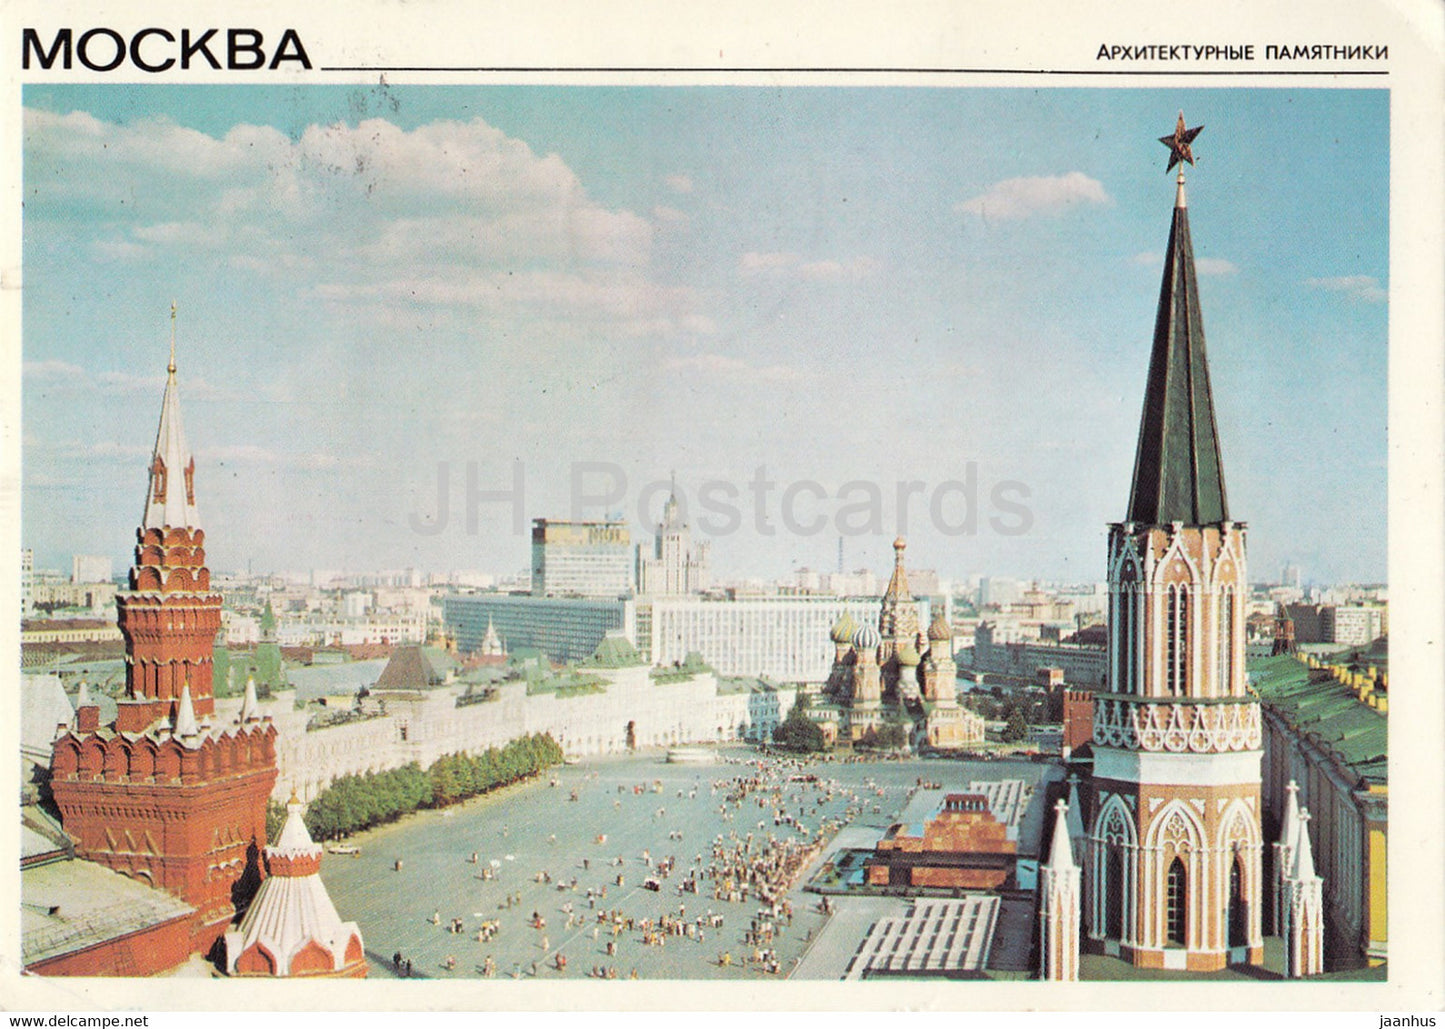 Moscow - Red Square - 1978 - Russia USSR - used - JH Postcards